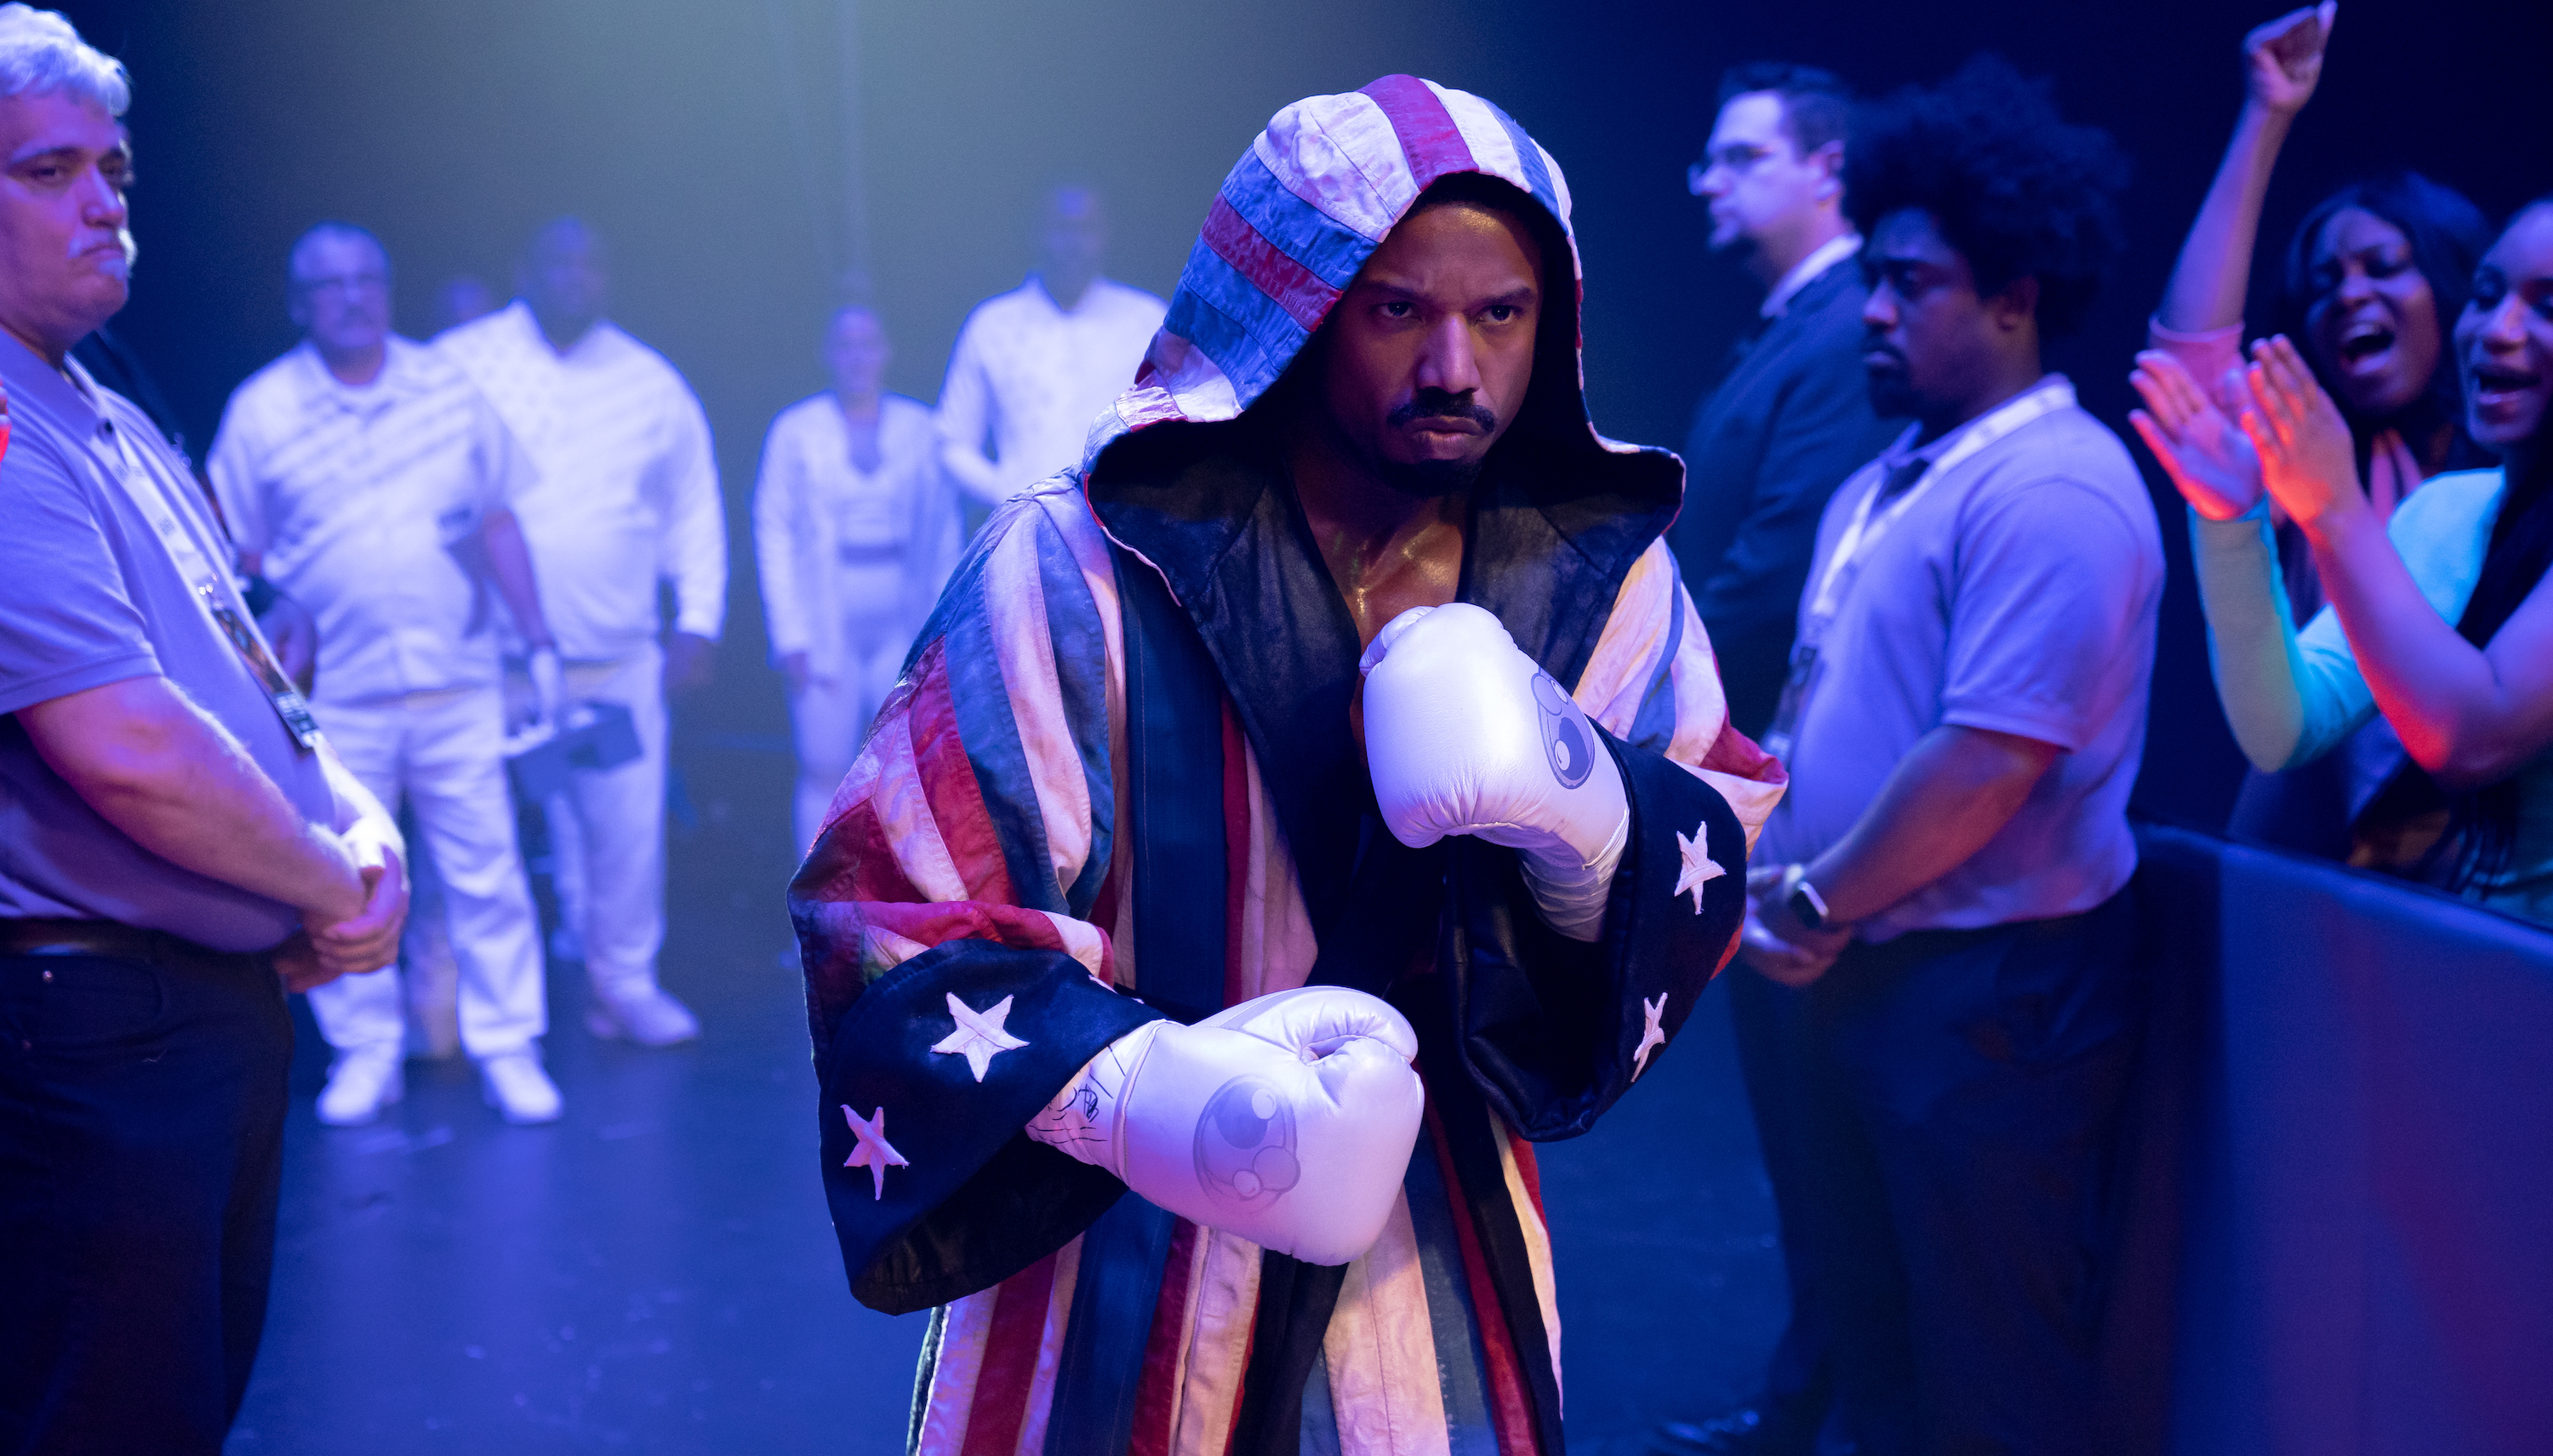 Adonis Creed (Michael B. Jordan) prepares to enter a boxing ring, in white gloves and a red, white, and blue American-flag themed hooded robe in Creed III